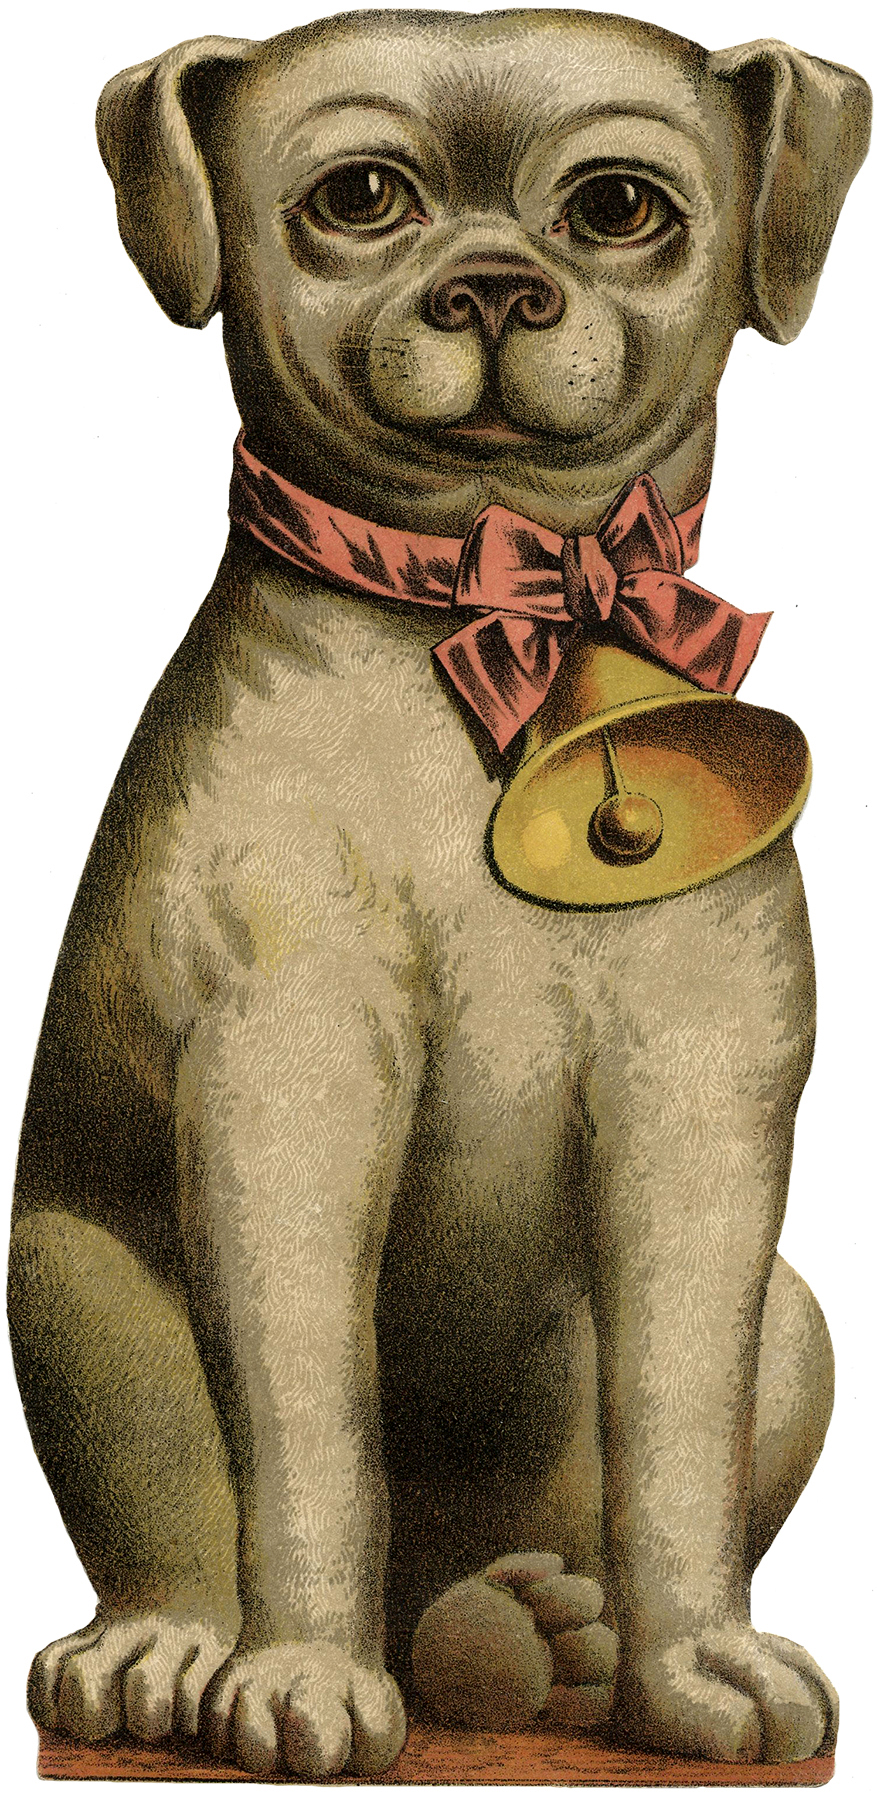 Vintage Quirky Dog Image - Cute! - The Graphics Fairy